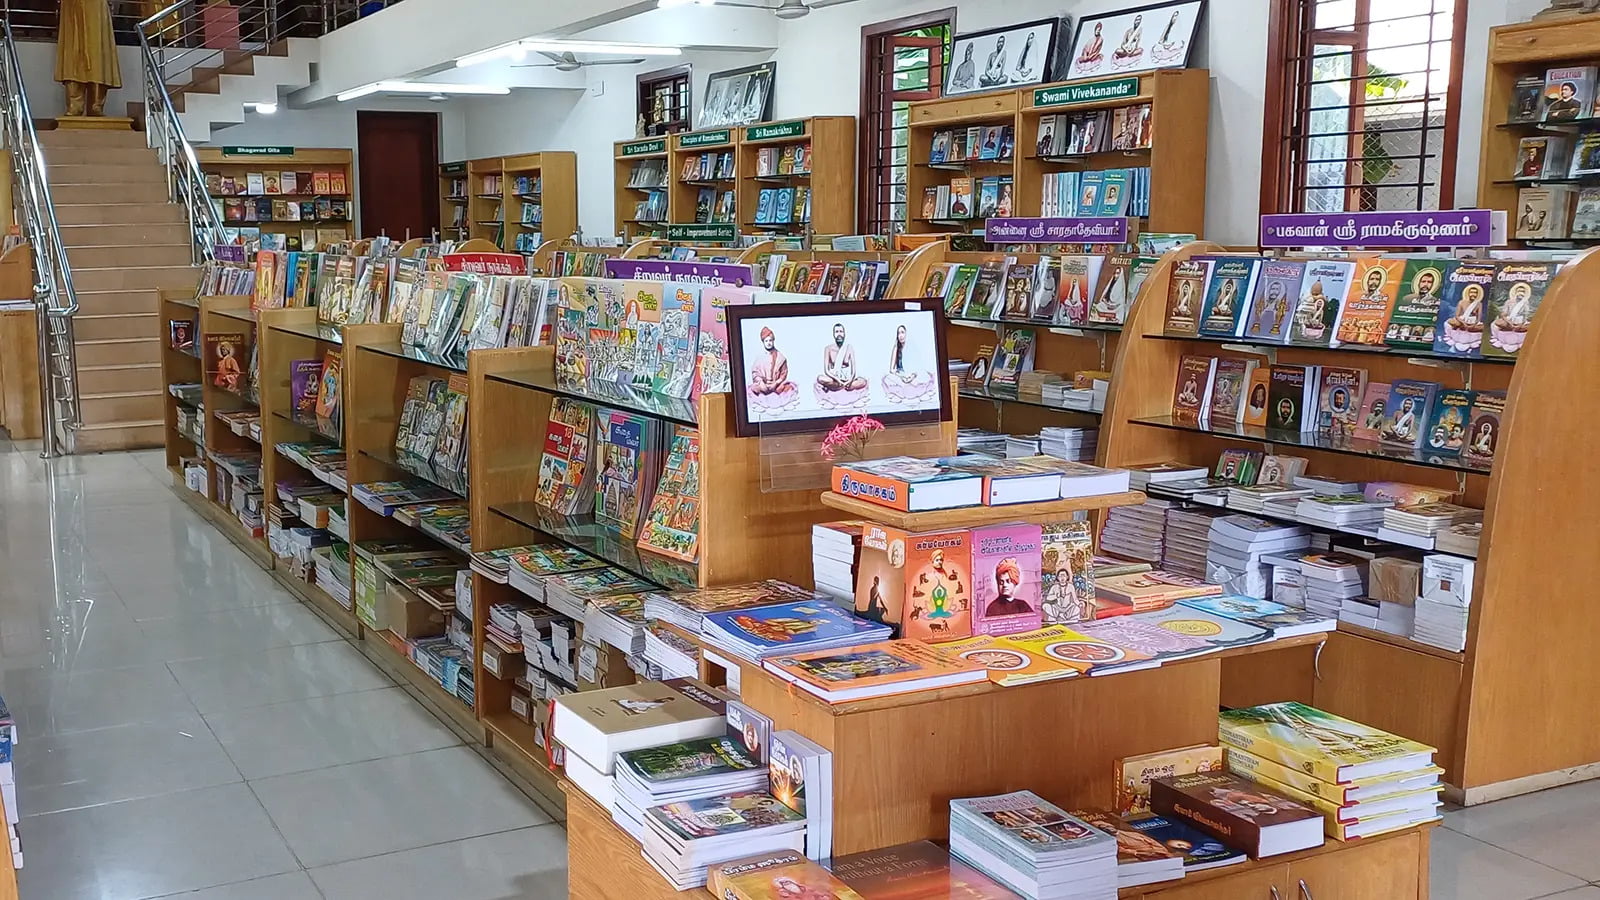 Interior view of a well-lit bookstore of Ramakrishna Math Madurai, with a large collection of books on white shelves and a staircase in the background